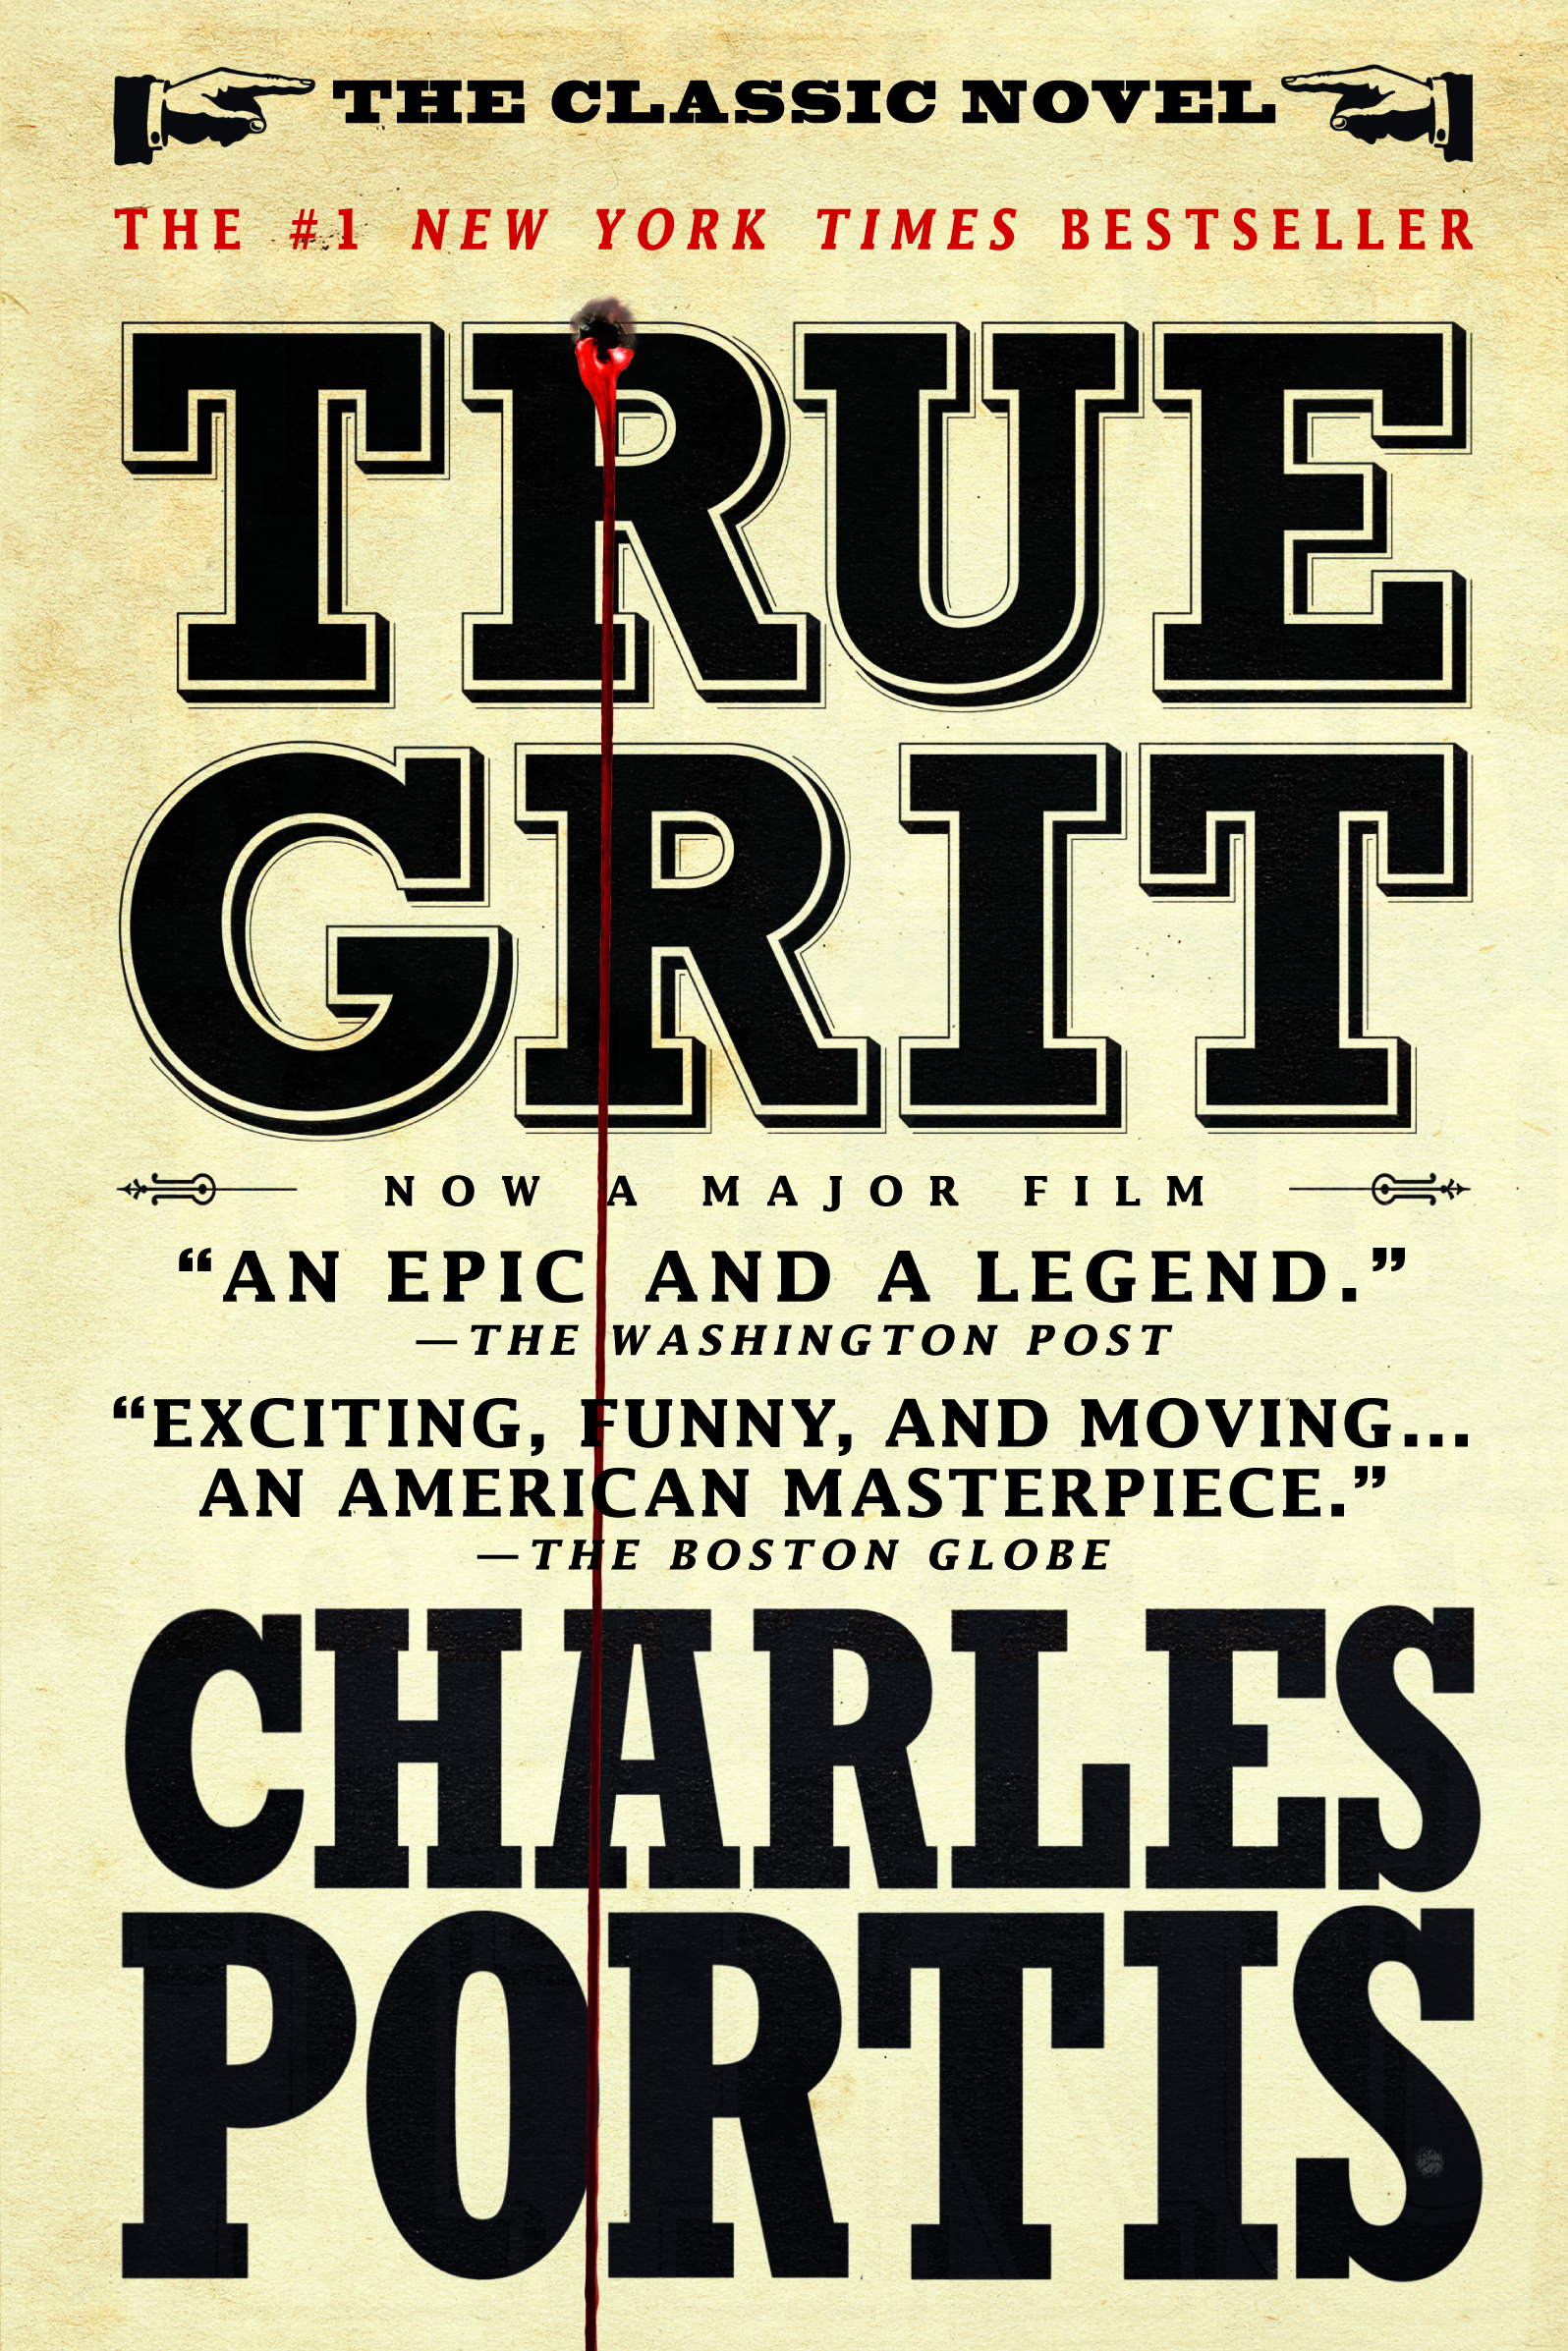 Book cover: title and author name with testimornials on a yellow background in an old west poster style